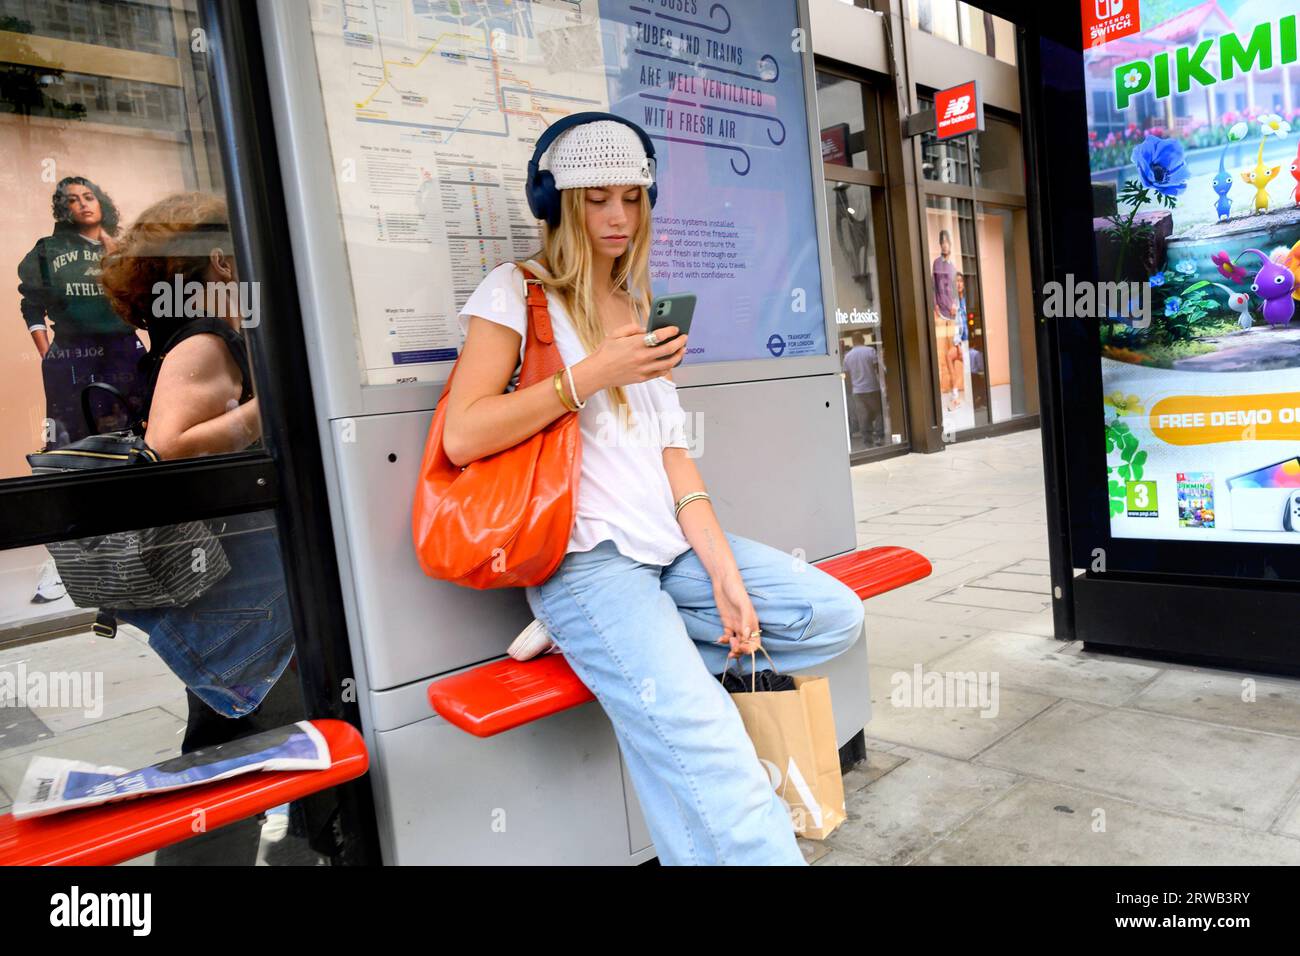 London, England, UK. Young woman at a bus stop wearing headphones and looking at her phone Stock Photo